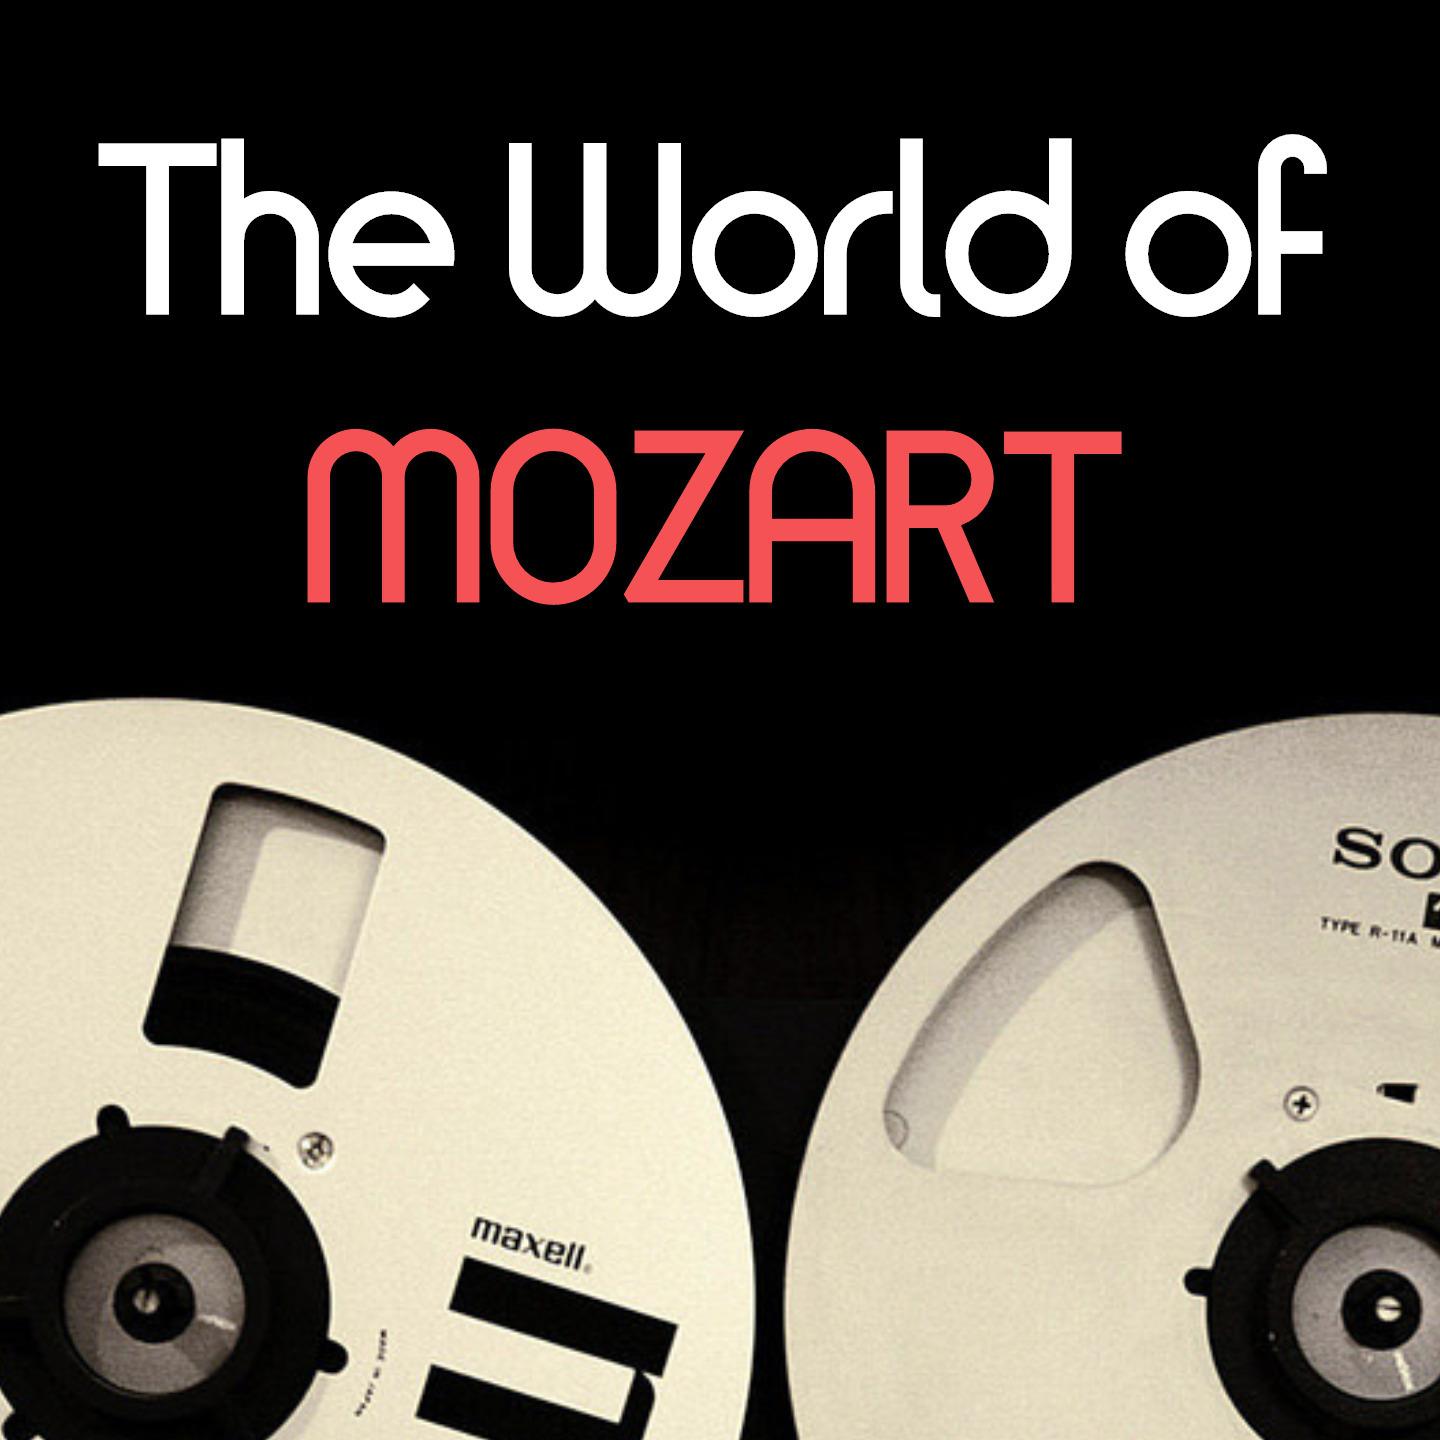 The world of mozart